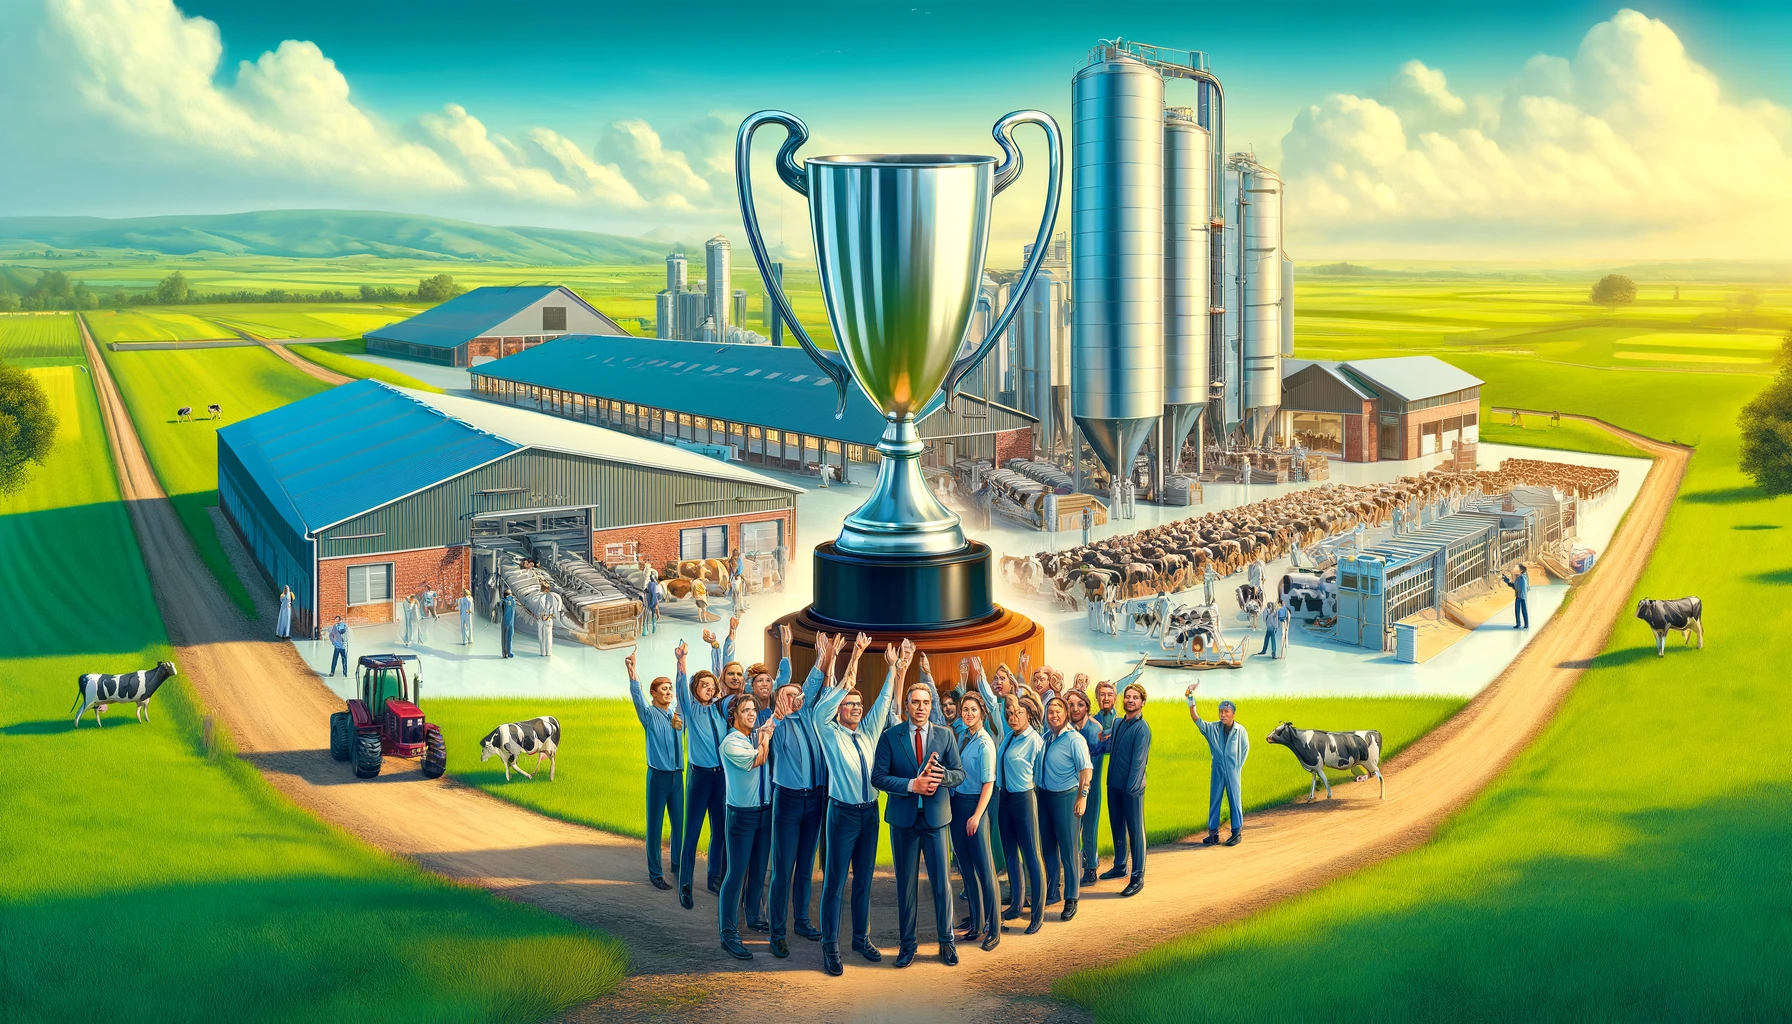 Big Latino Dairy - A vivid and detailed wide illustration of the 'Big Latino Dairy', an award-winning dairy and milk production facility in Latin America. The scene show (2)